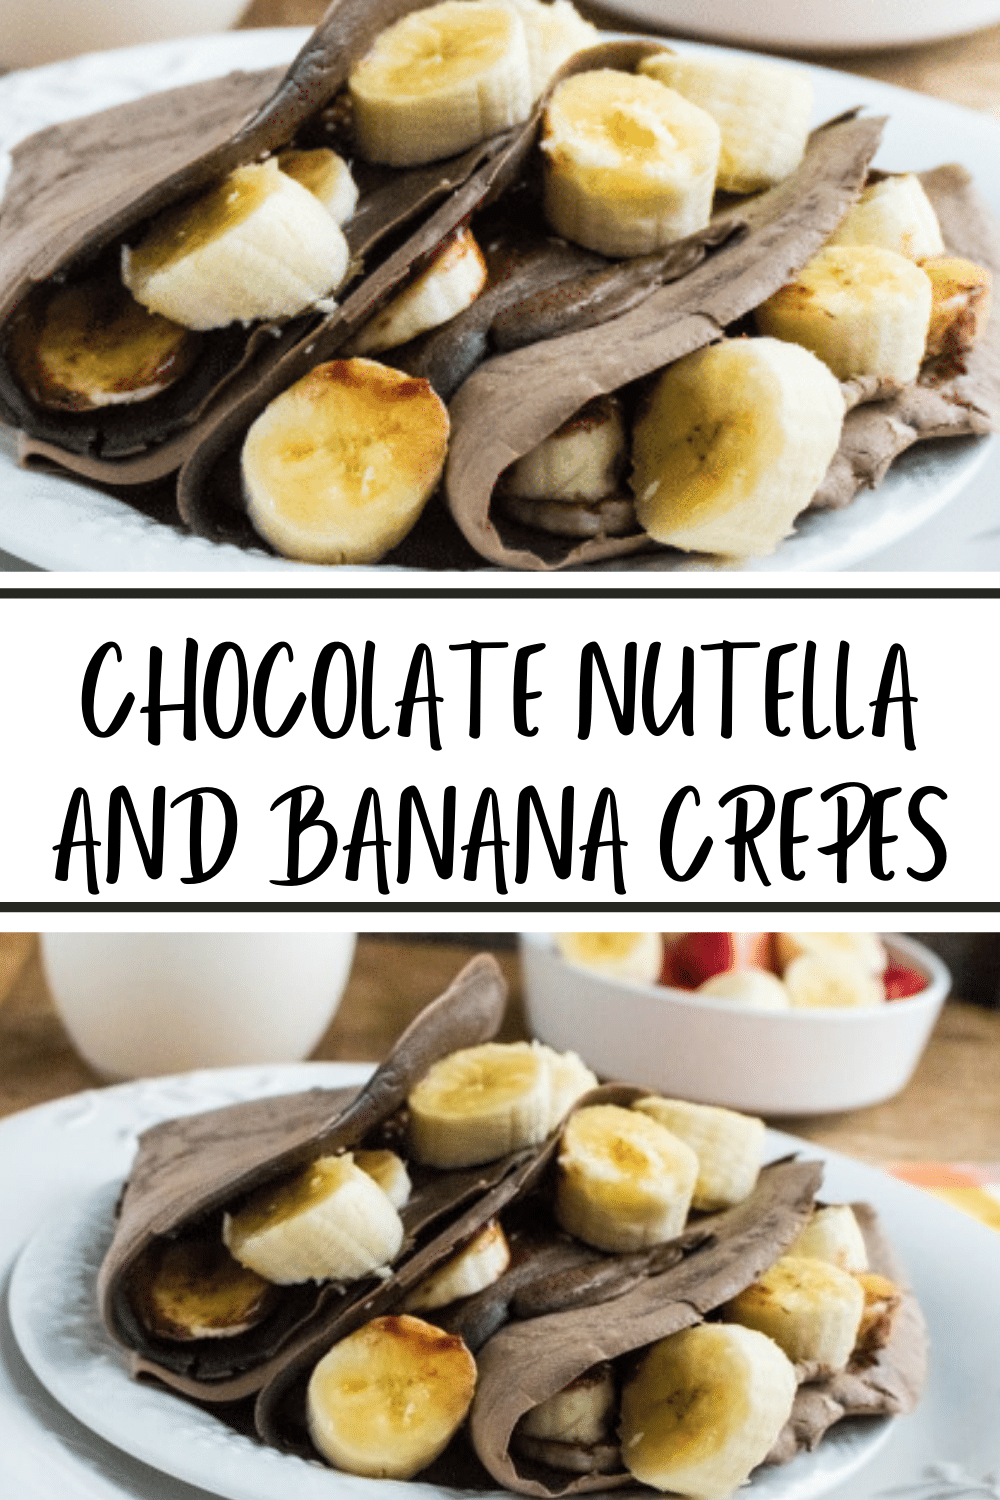 Chocolate Nutella and Banana Crepes are a delicious way to start the day. This decadent breakfast is easy to make and your family will ask for more! #crepes #breakfast #Nutella via @wondermomwannab